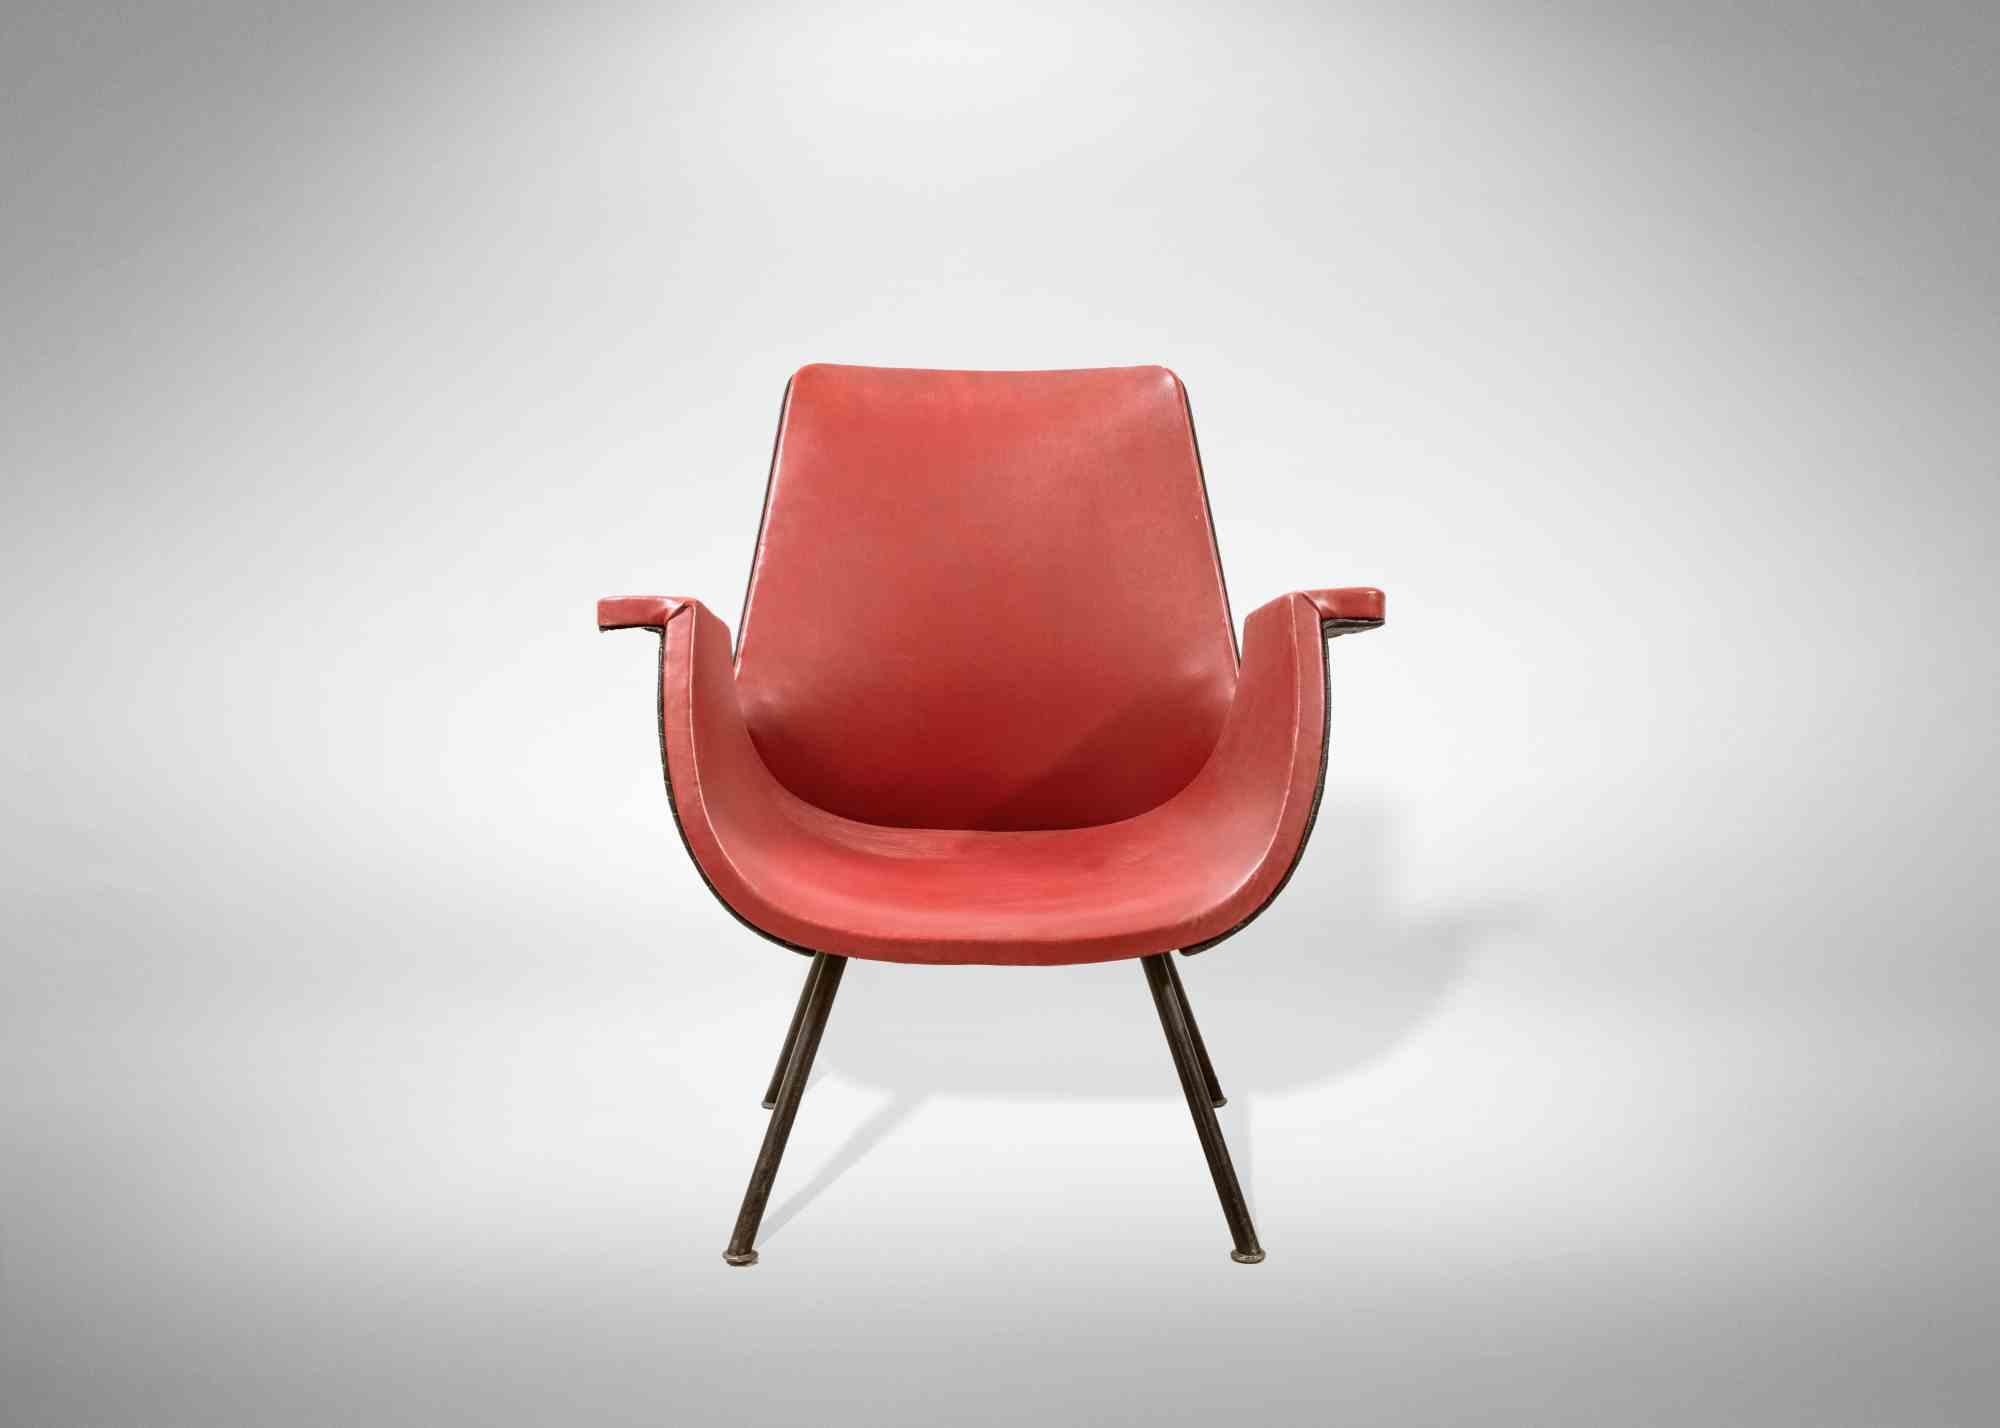 Italian Pair of Vintage Red Armchairs by Gastone Rinaldi, Mid-20th Century For Sale